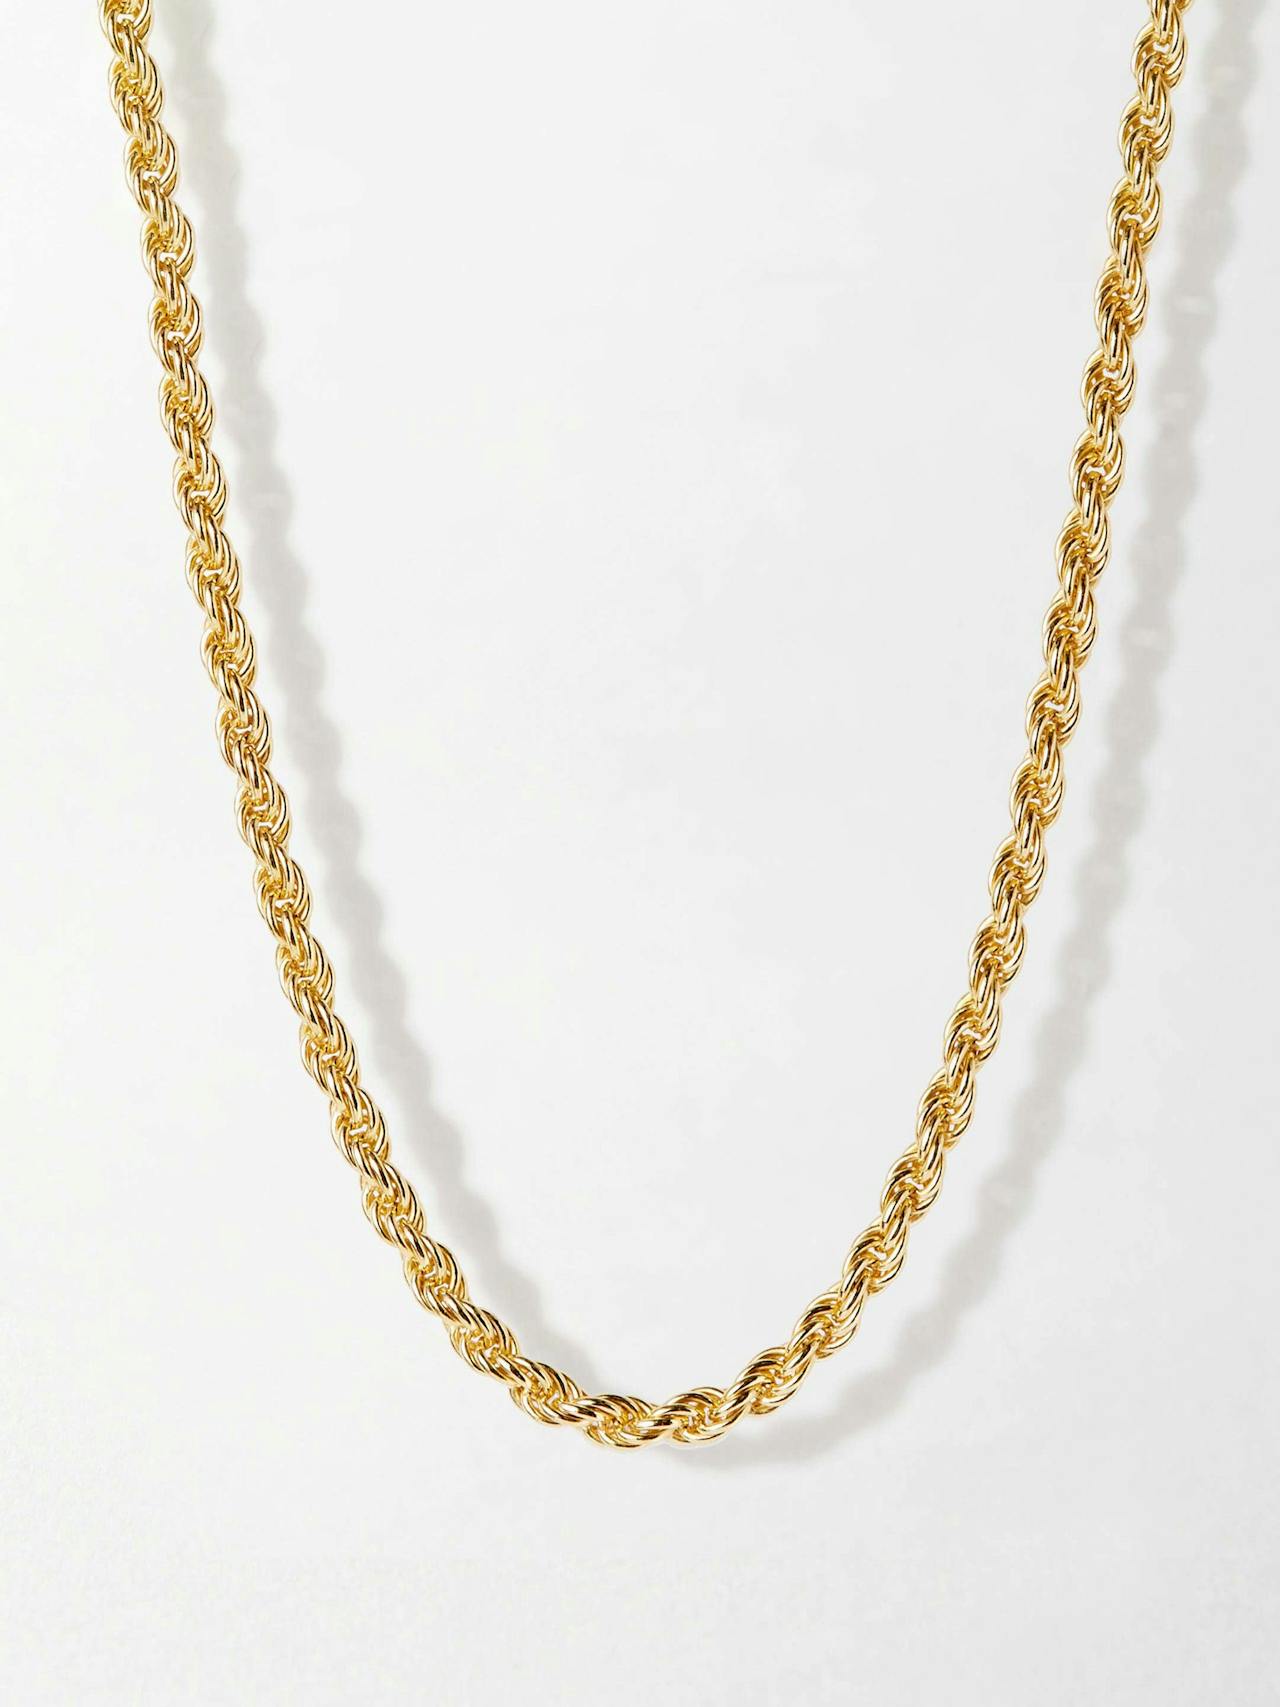 Chunky rope chain necklace